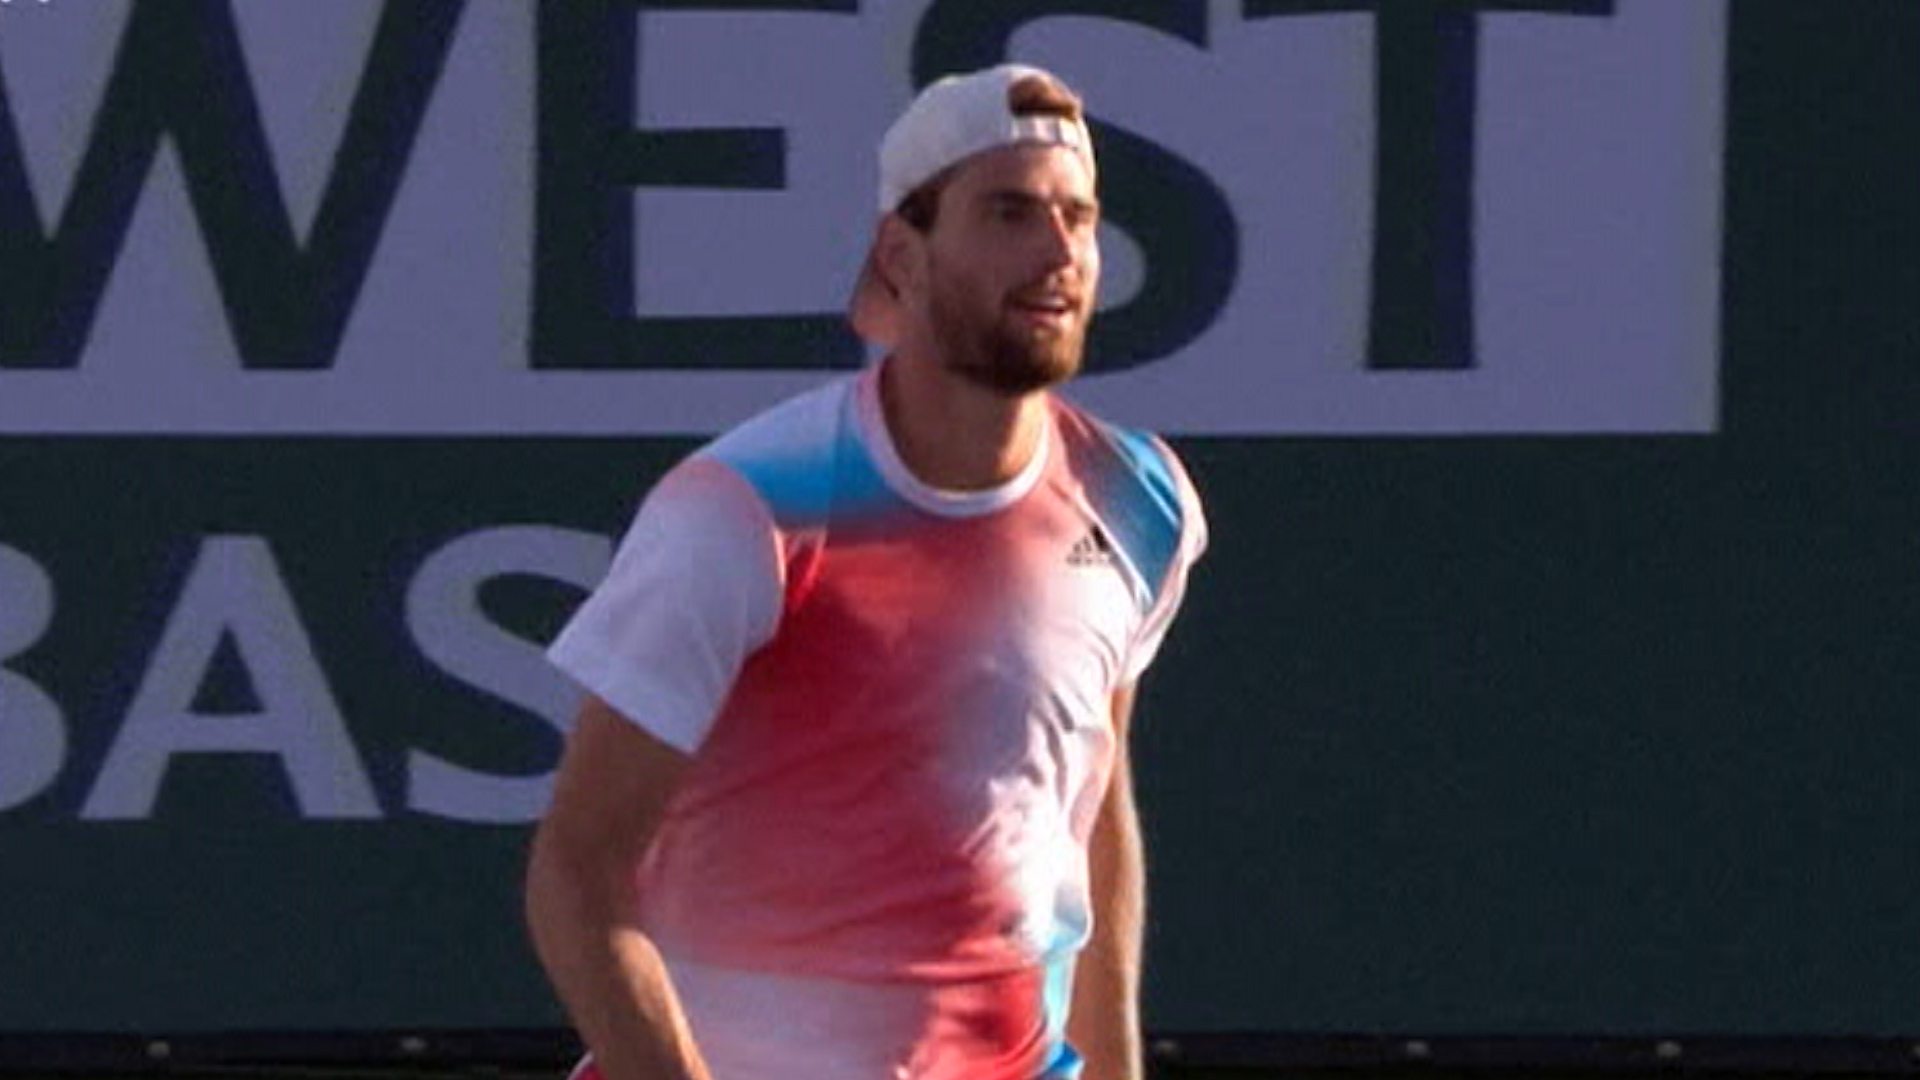 Maxime Cressy serves bizarre 26mph ace at Indian Wells against Christopher Eubanks